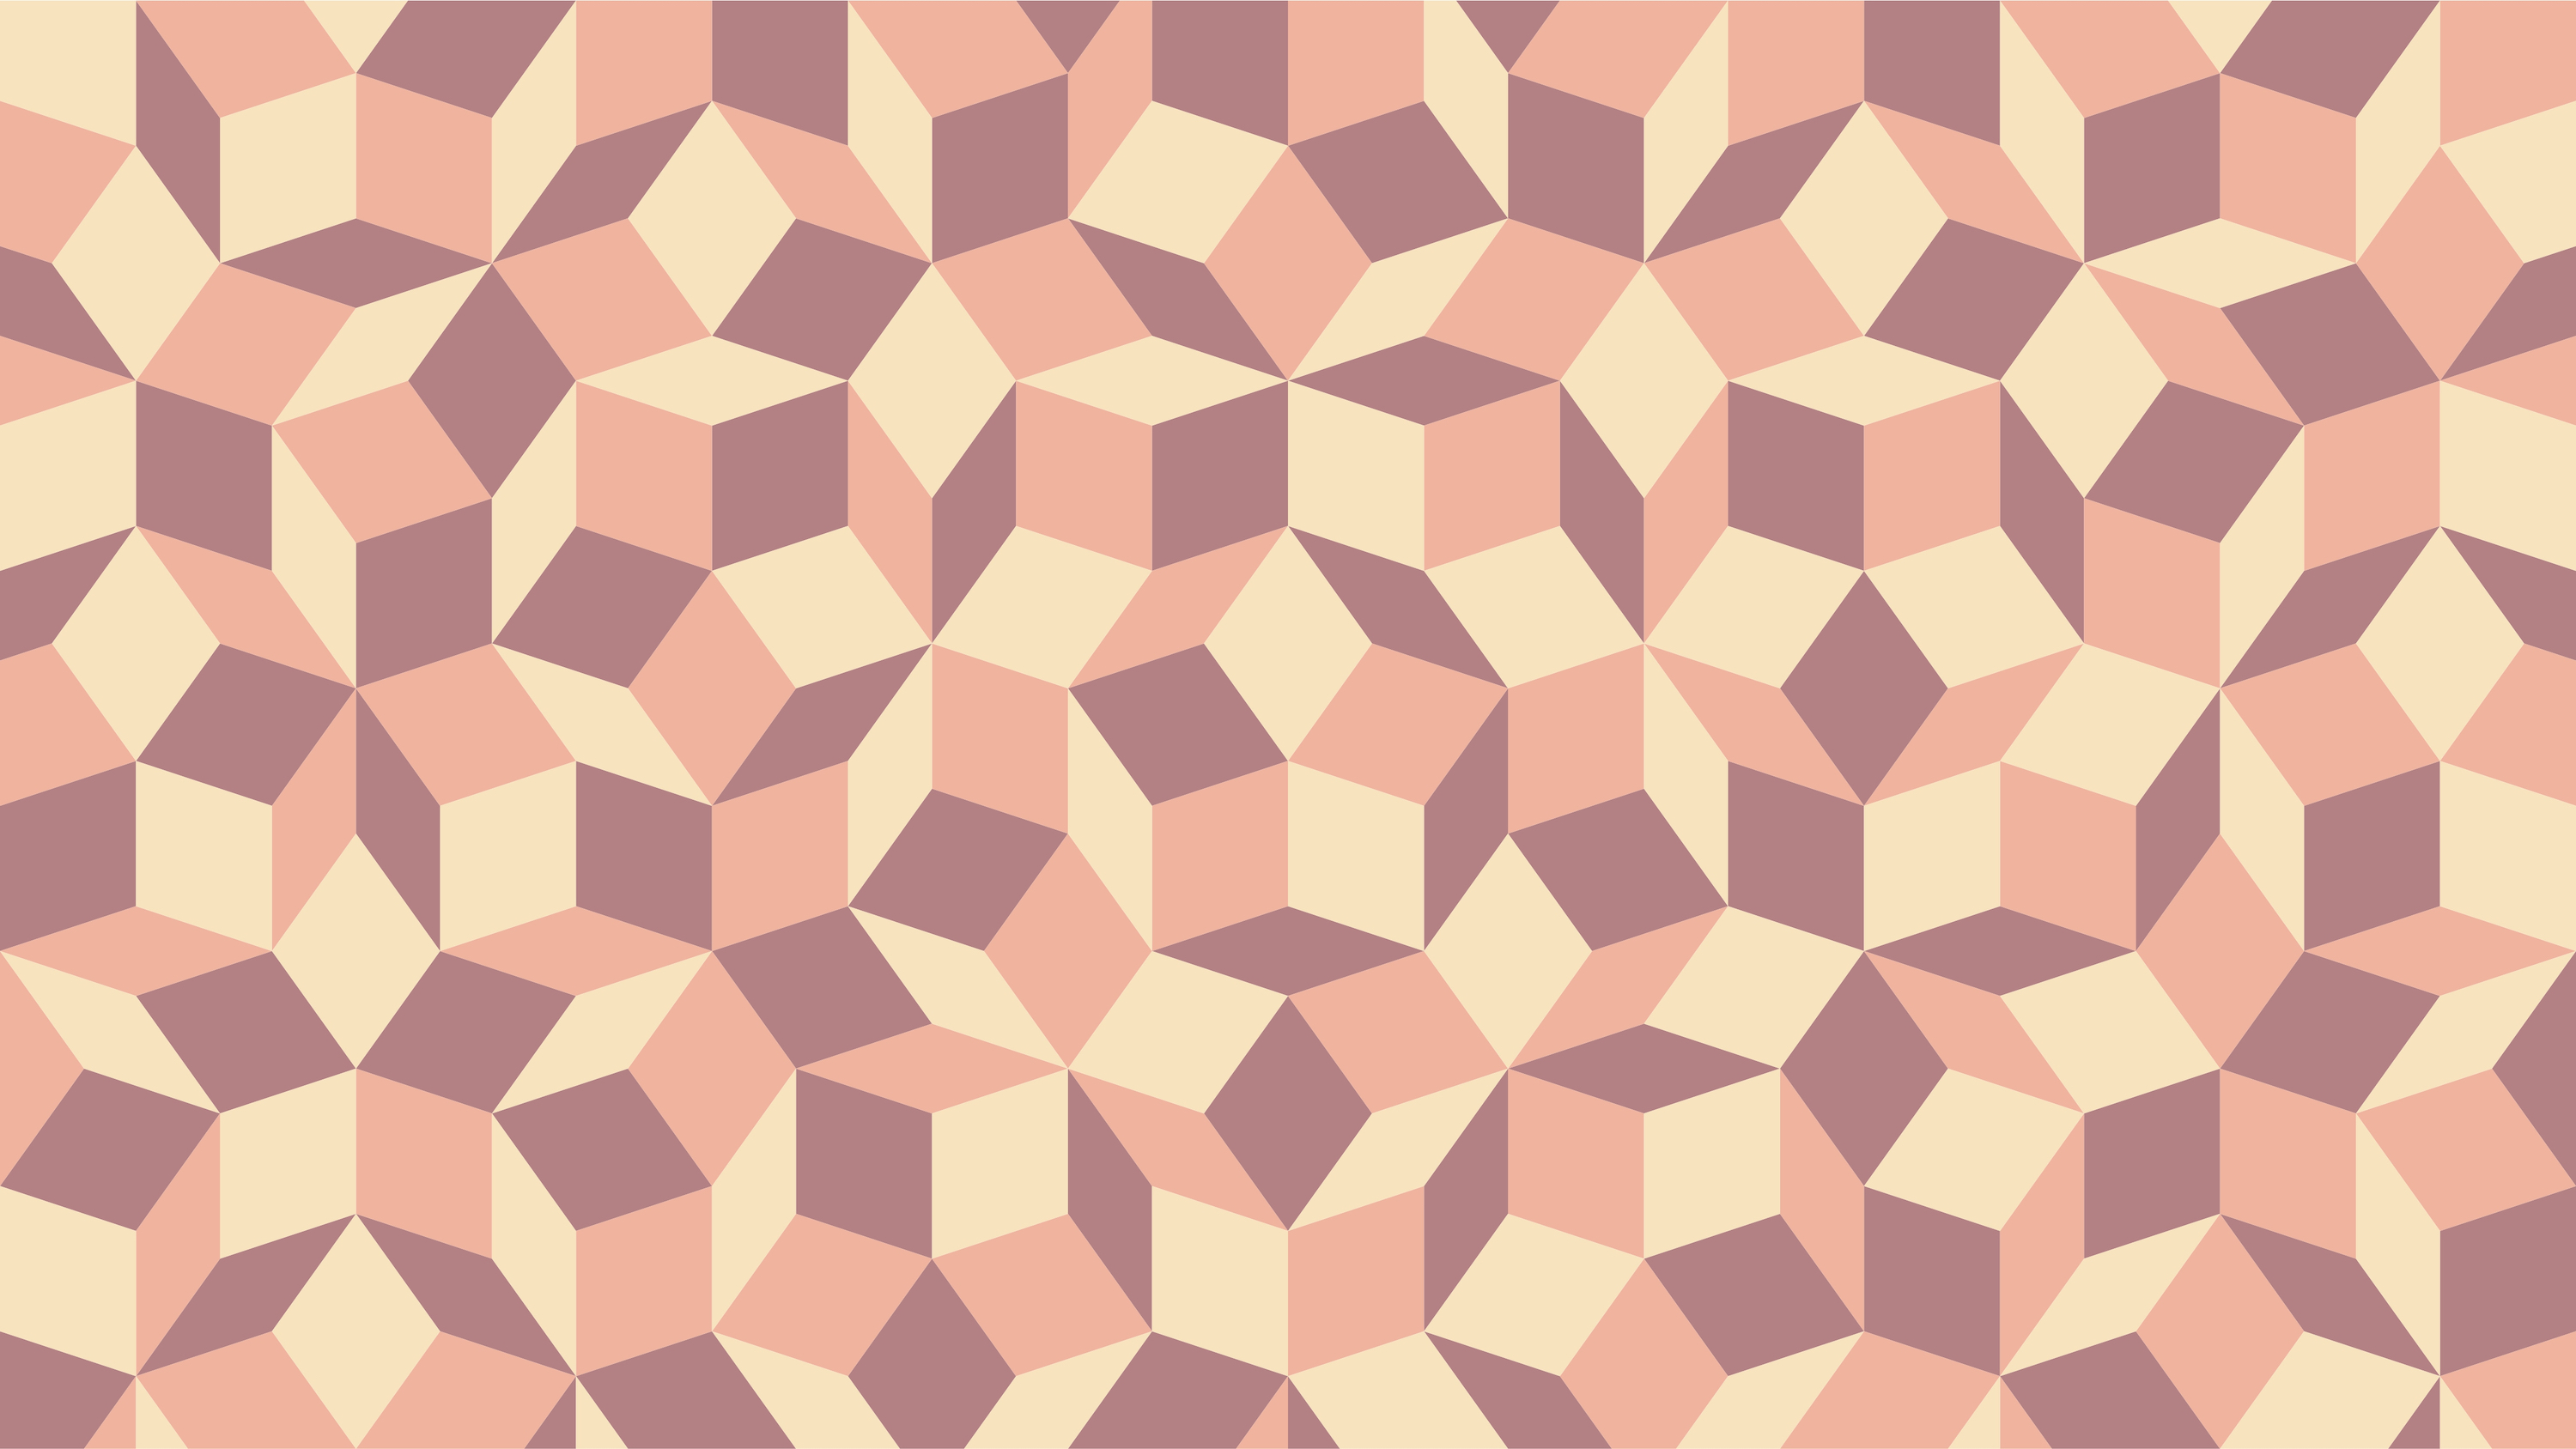 An example of penrose tiling